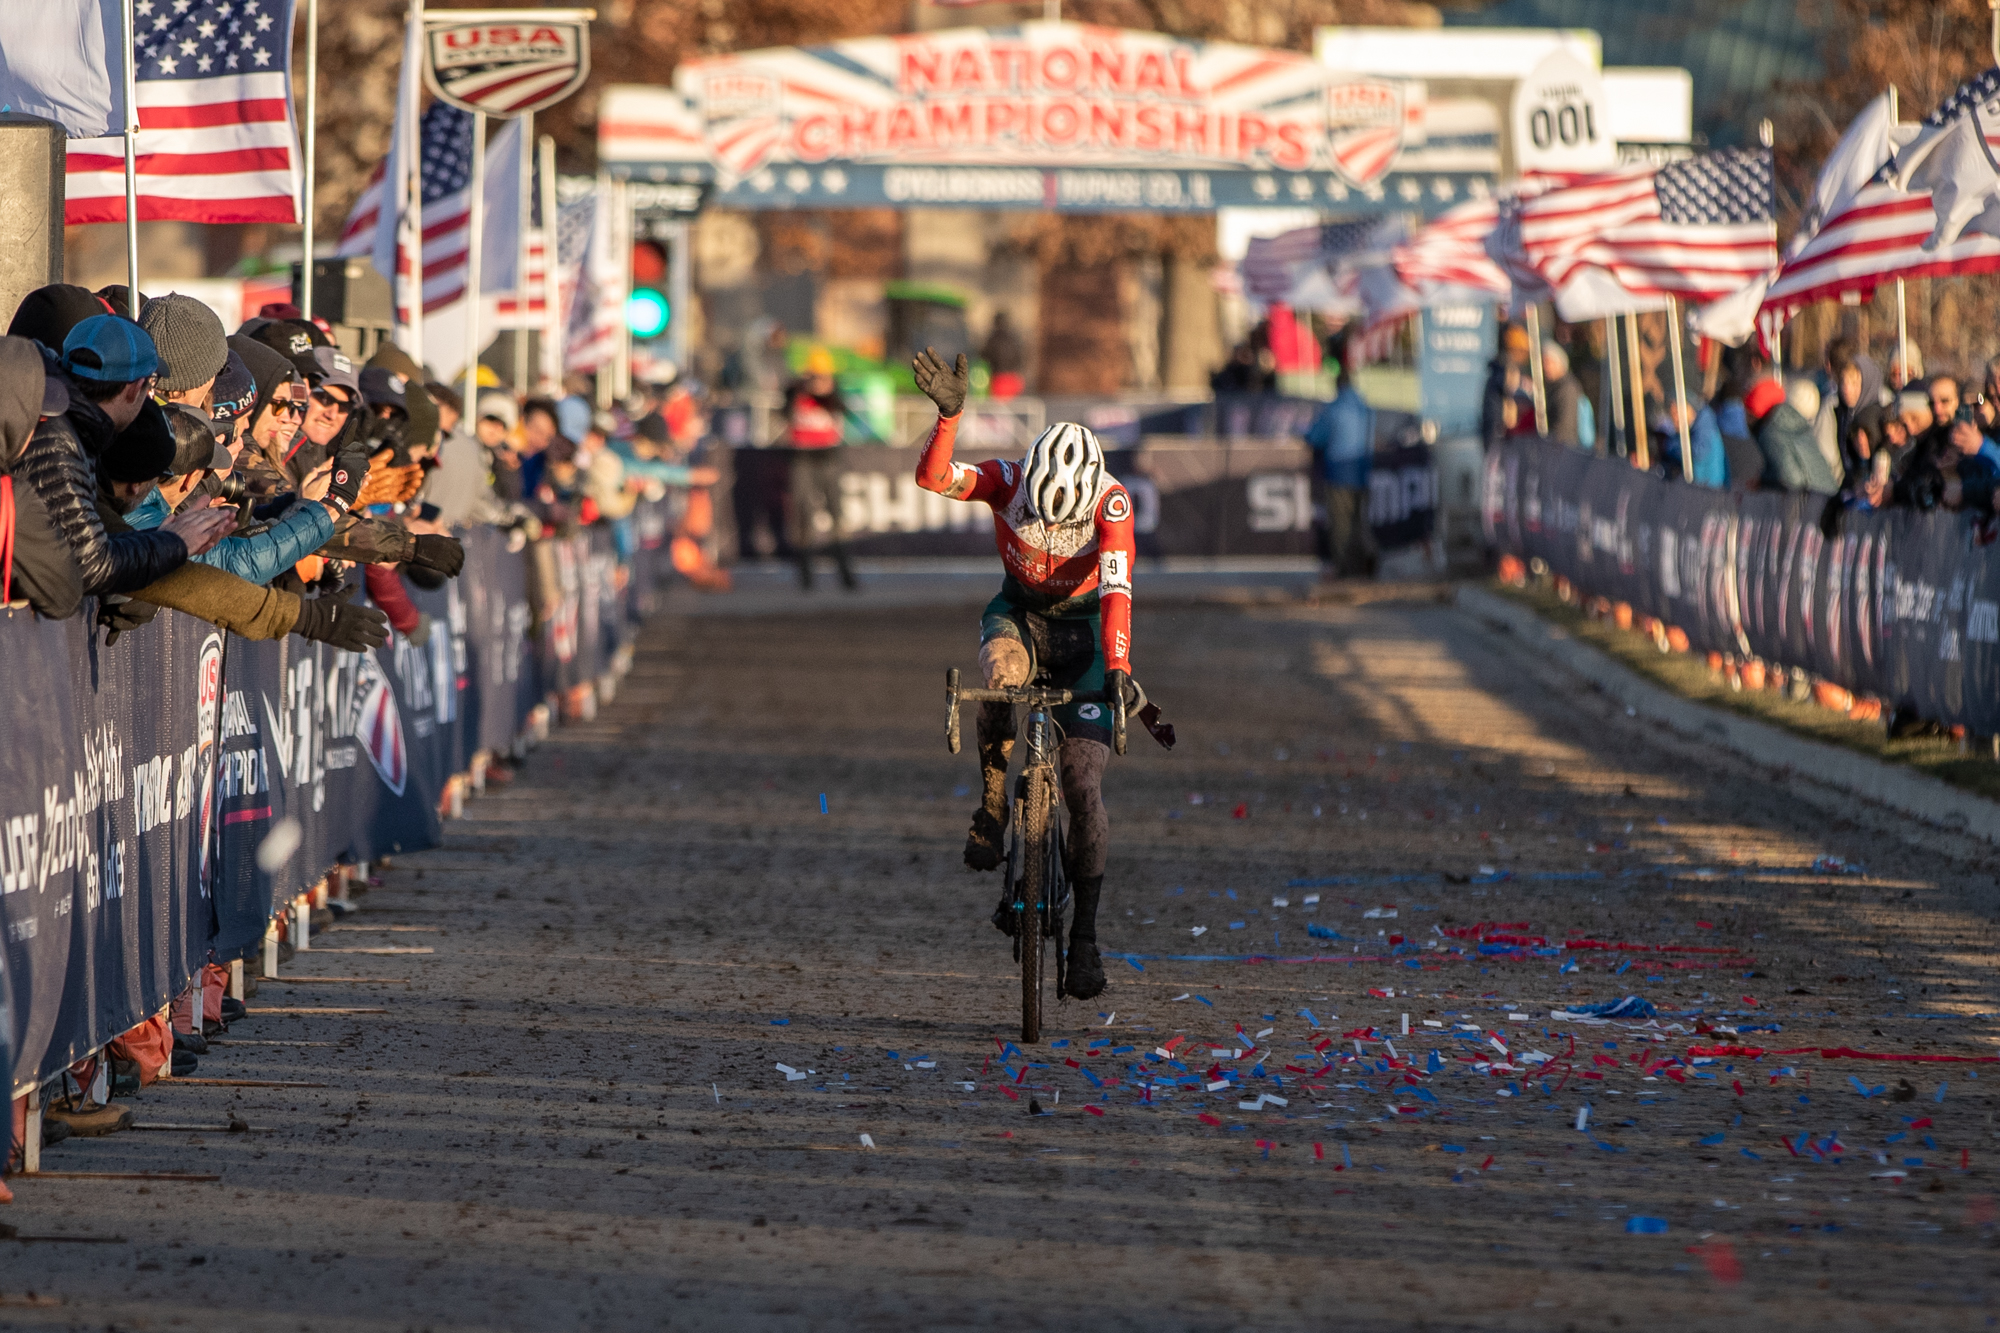 Caleb Swartz crosses the finish line at the 2021 Cyclocross National Championship.